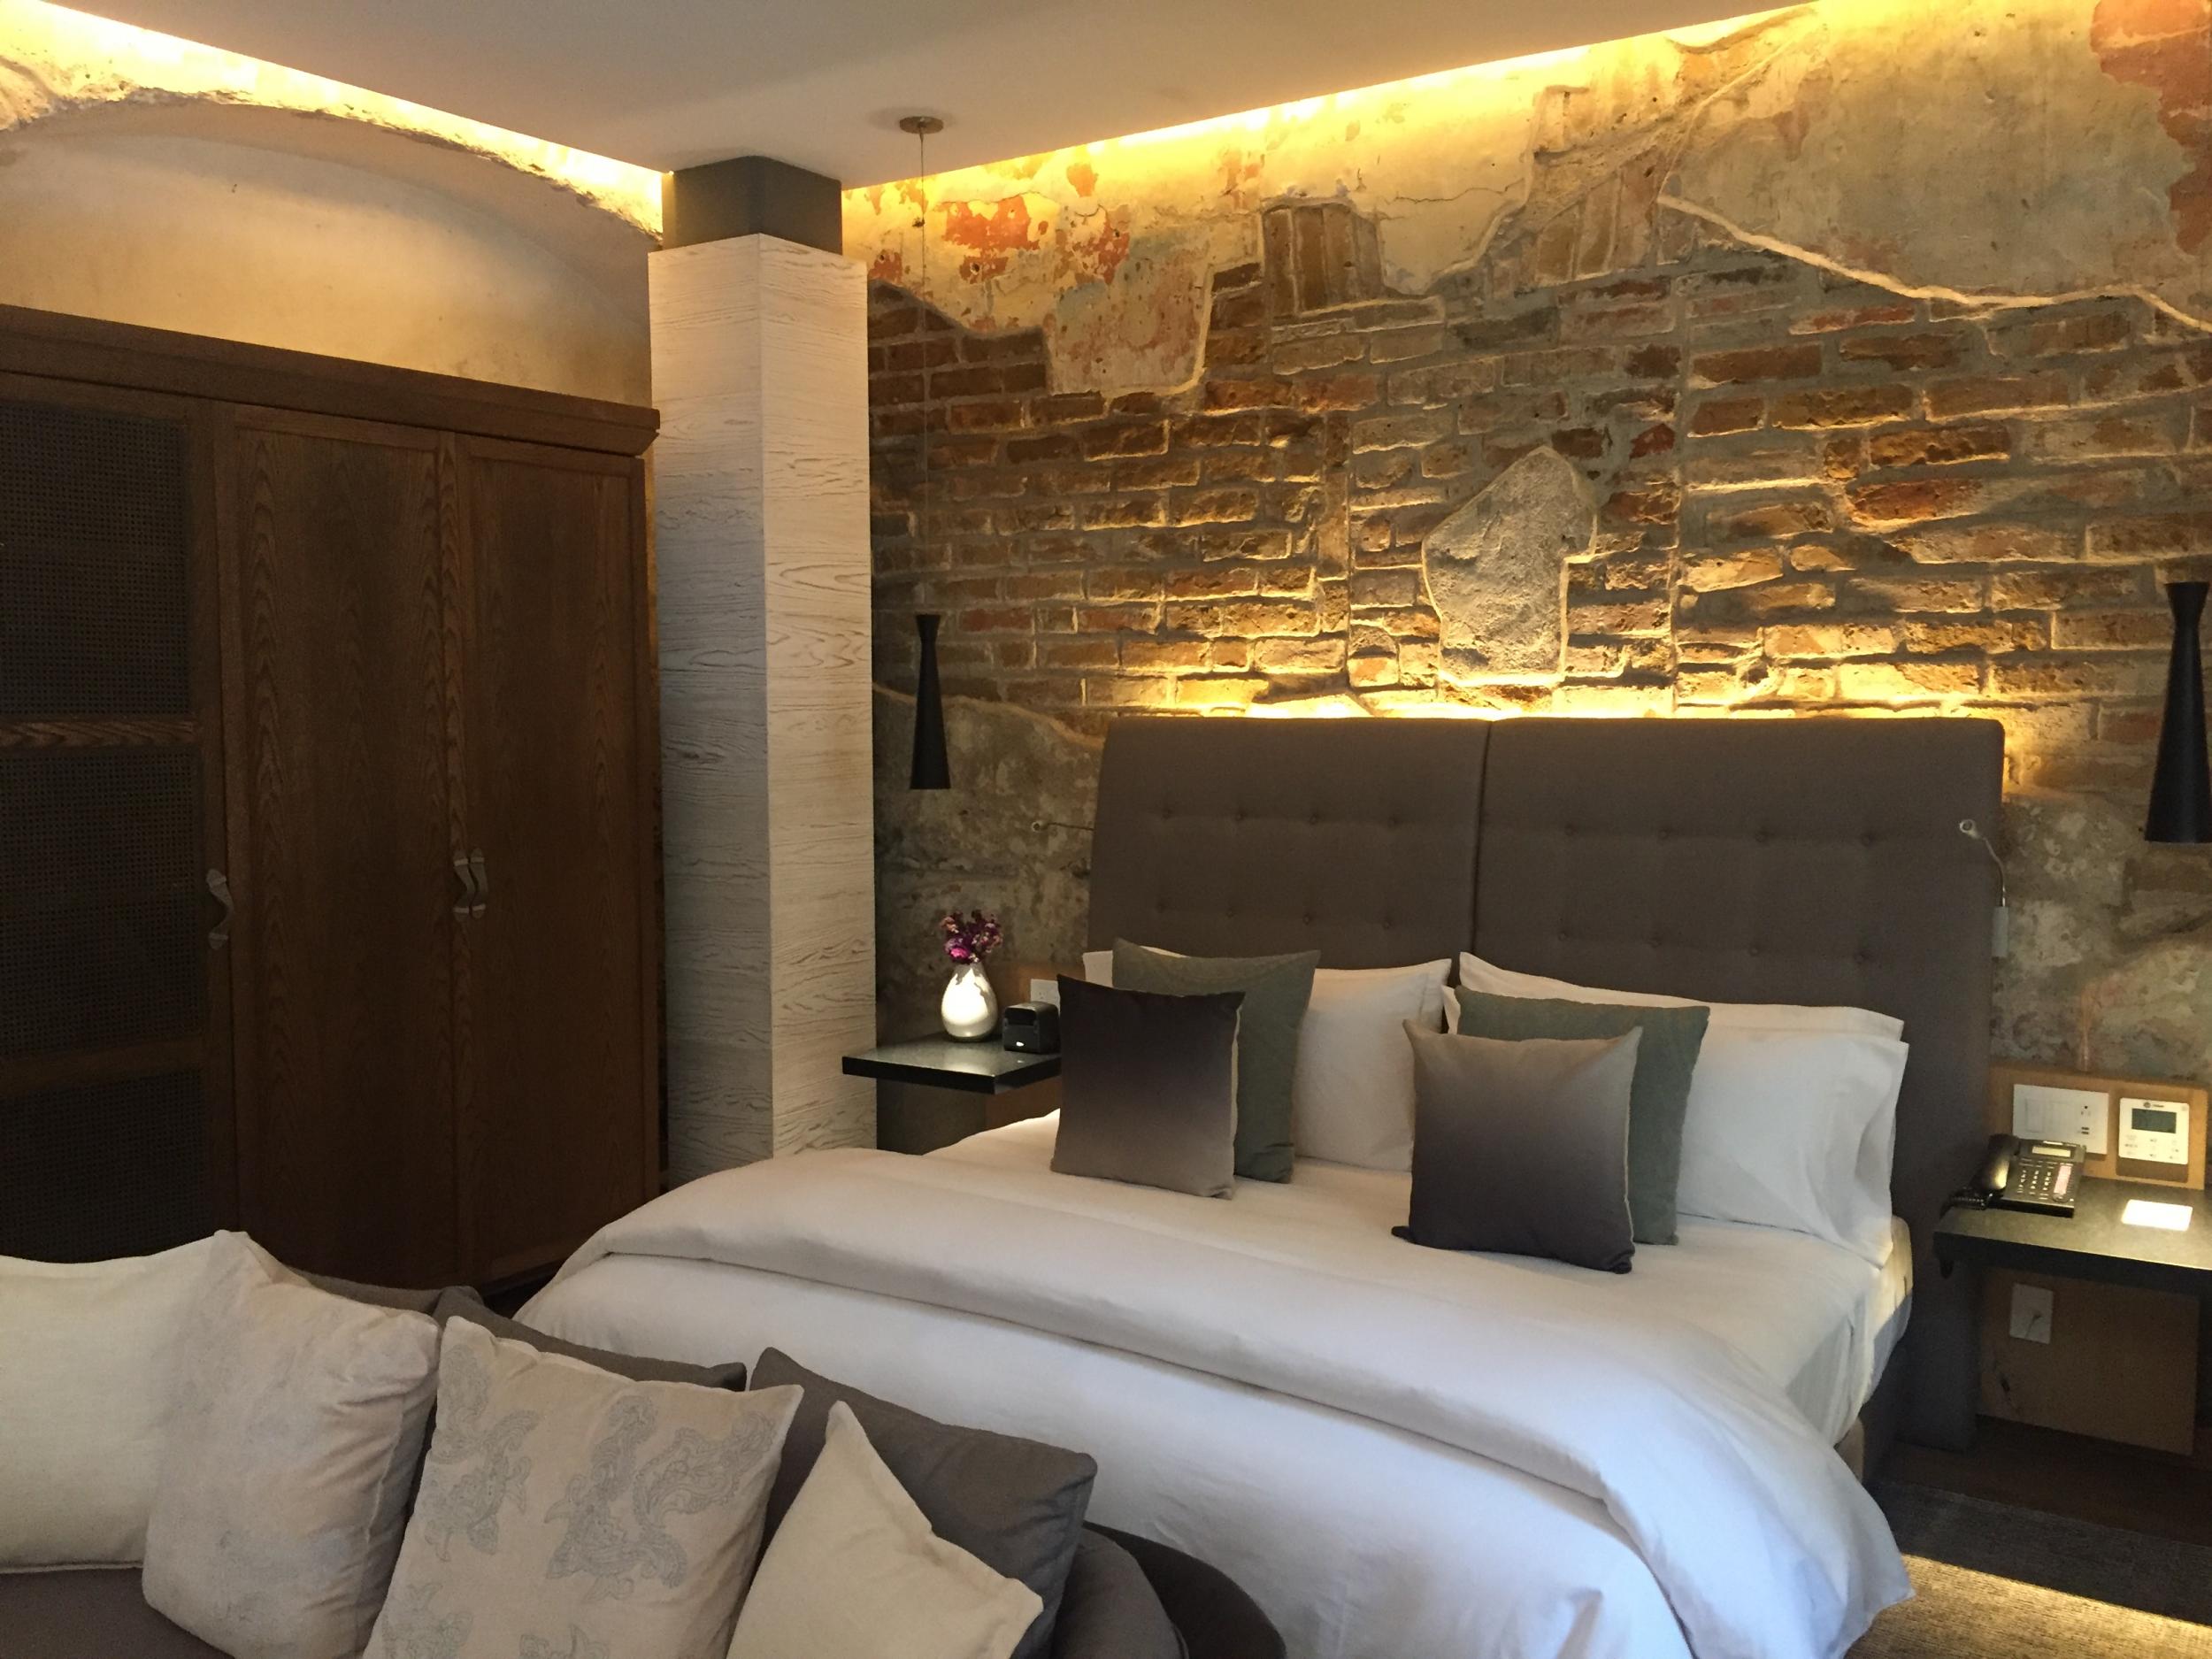 The Cartesiano is a luxury boutique hotel